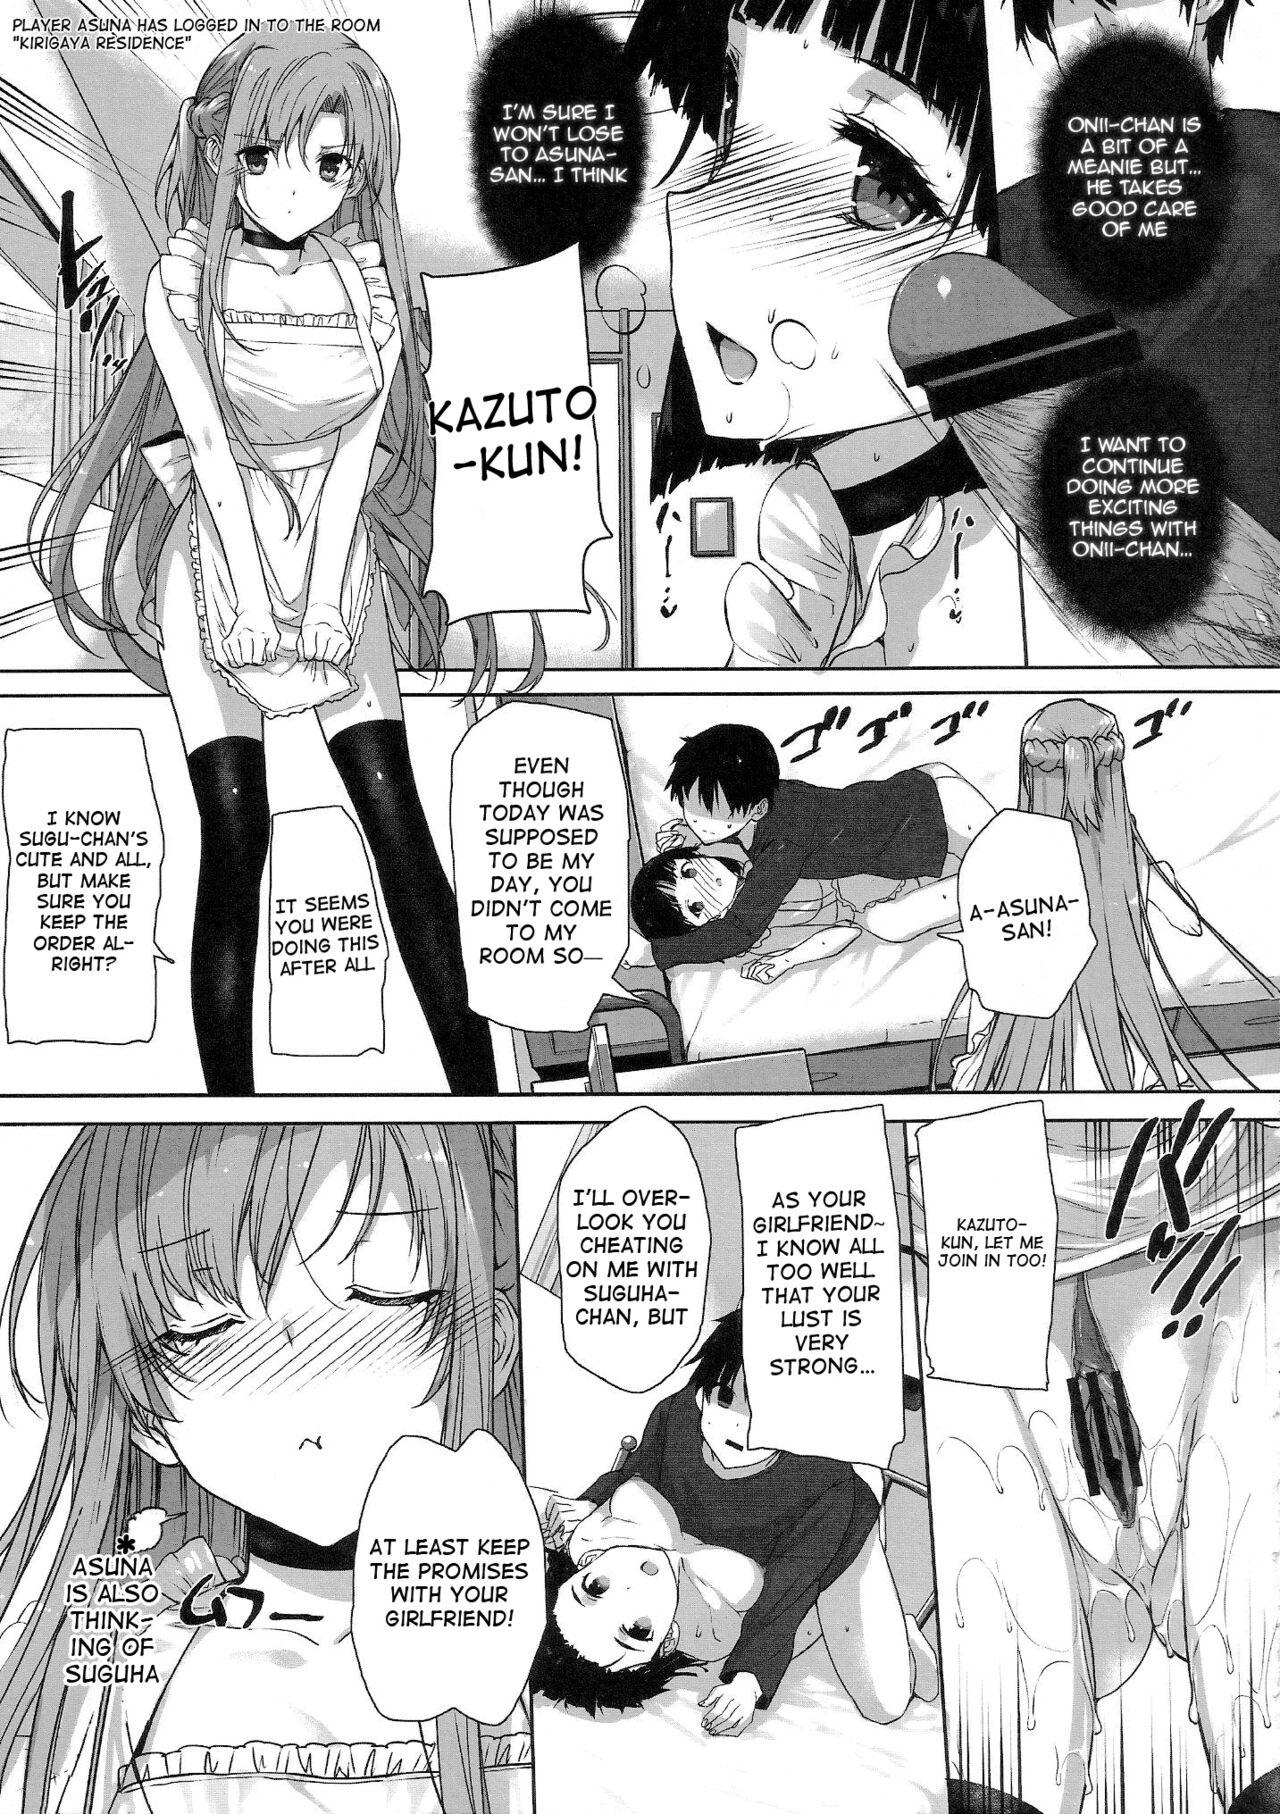 Exhib Inran SWORD ART SISTER x LOVER | Perverted Sword Art - Sister x Lover - Sword art online Hand Job - Page 8